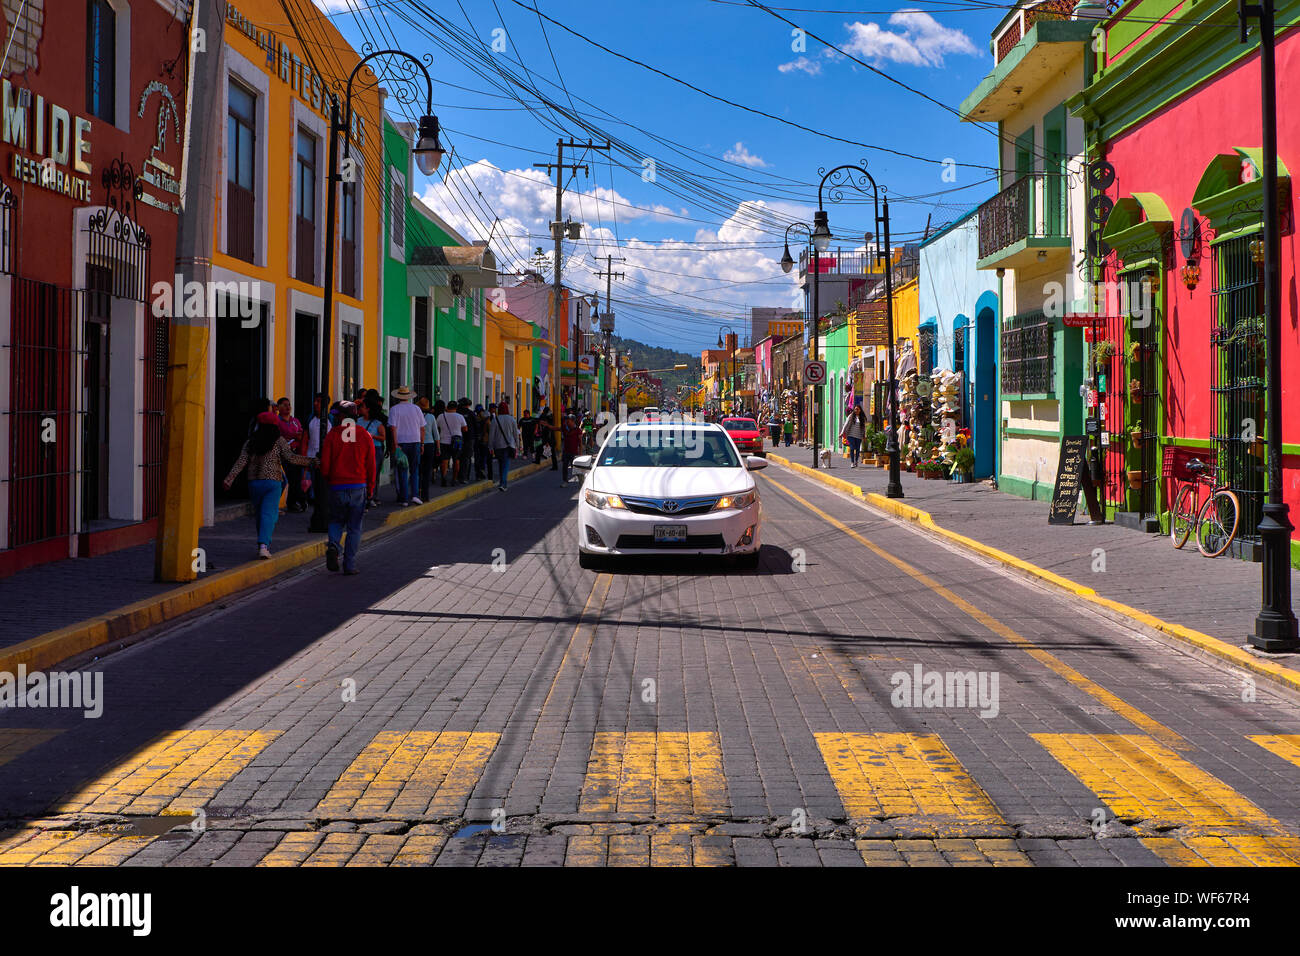 San Pedro Cholula, Mexico, September 30, 2019 - Avenida Morelos street of Cholula with tourists and cars at sunny day, traditional clothing and souvenir shops with vibrant colored facades. Stock Photo